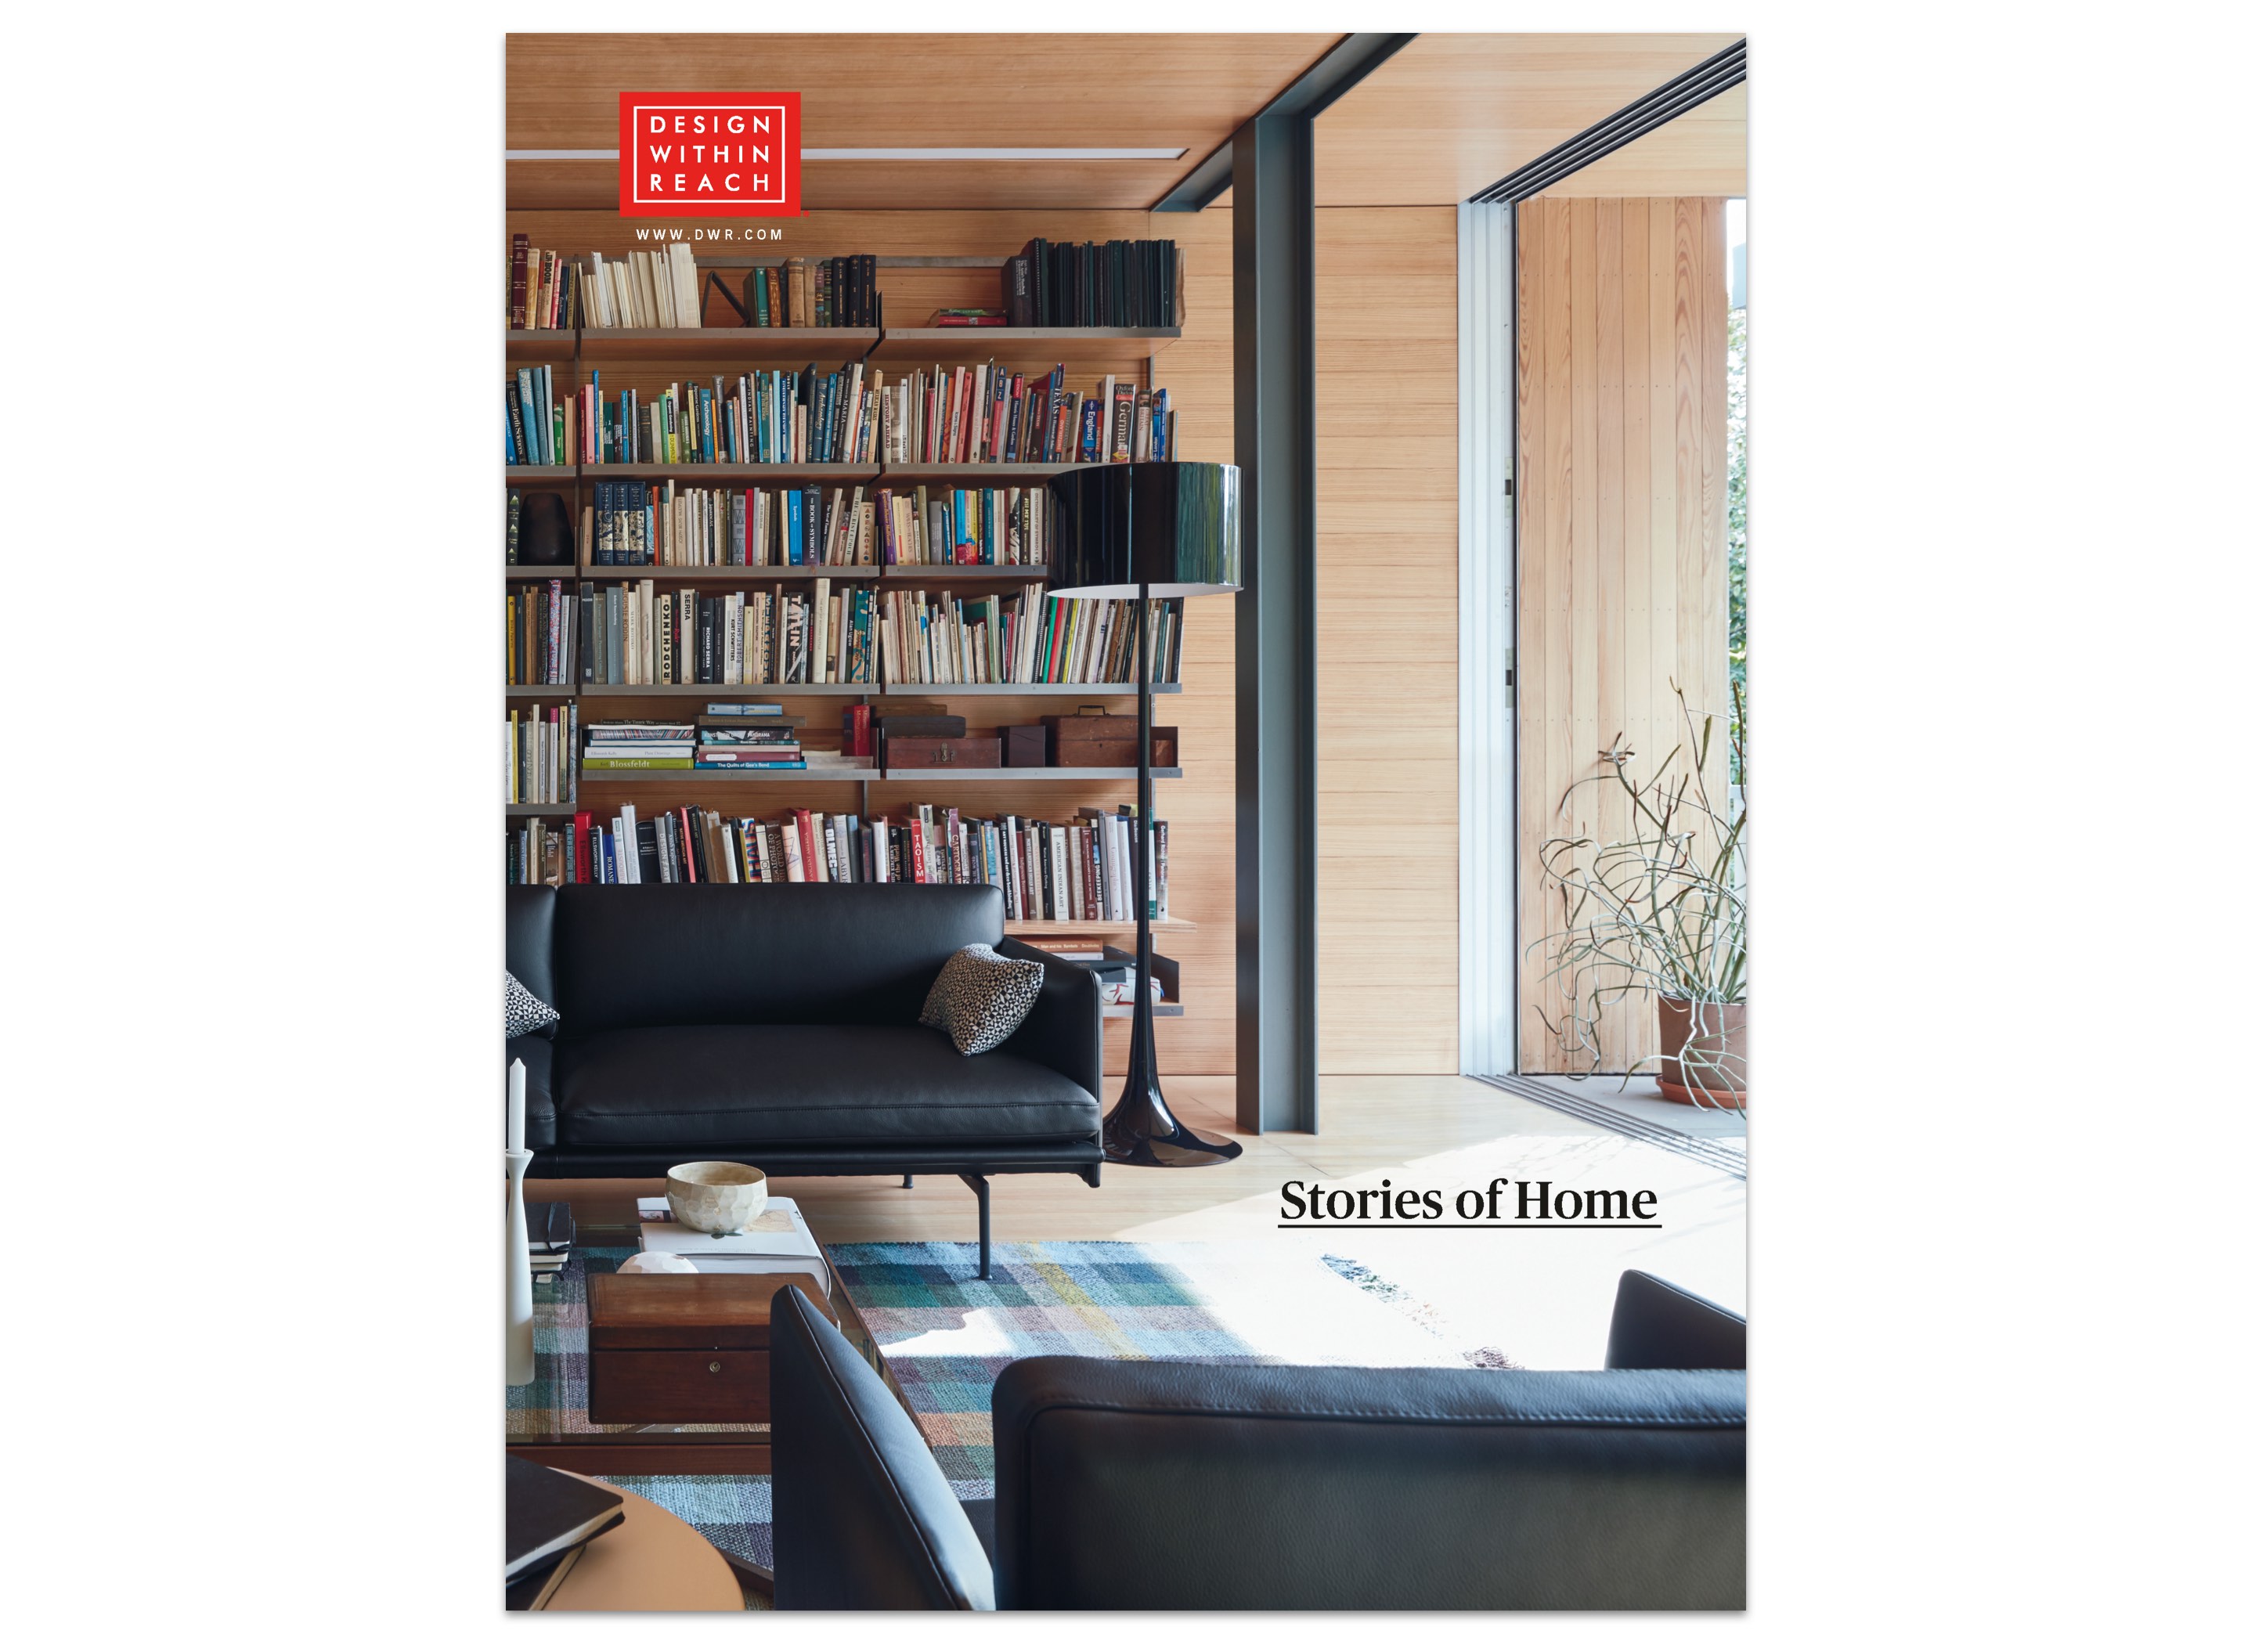 DWR catalog cover featuring a room with leather sofa and chair, bookcase filled with books, and area rug and editorial headline style